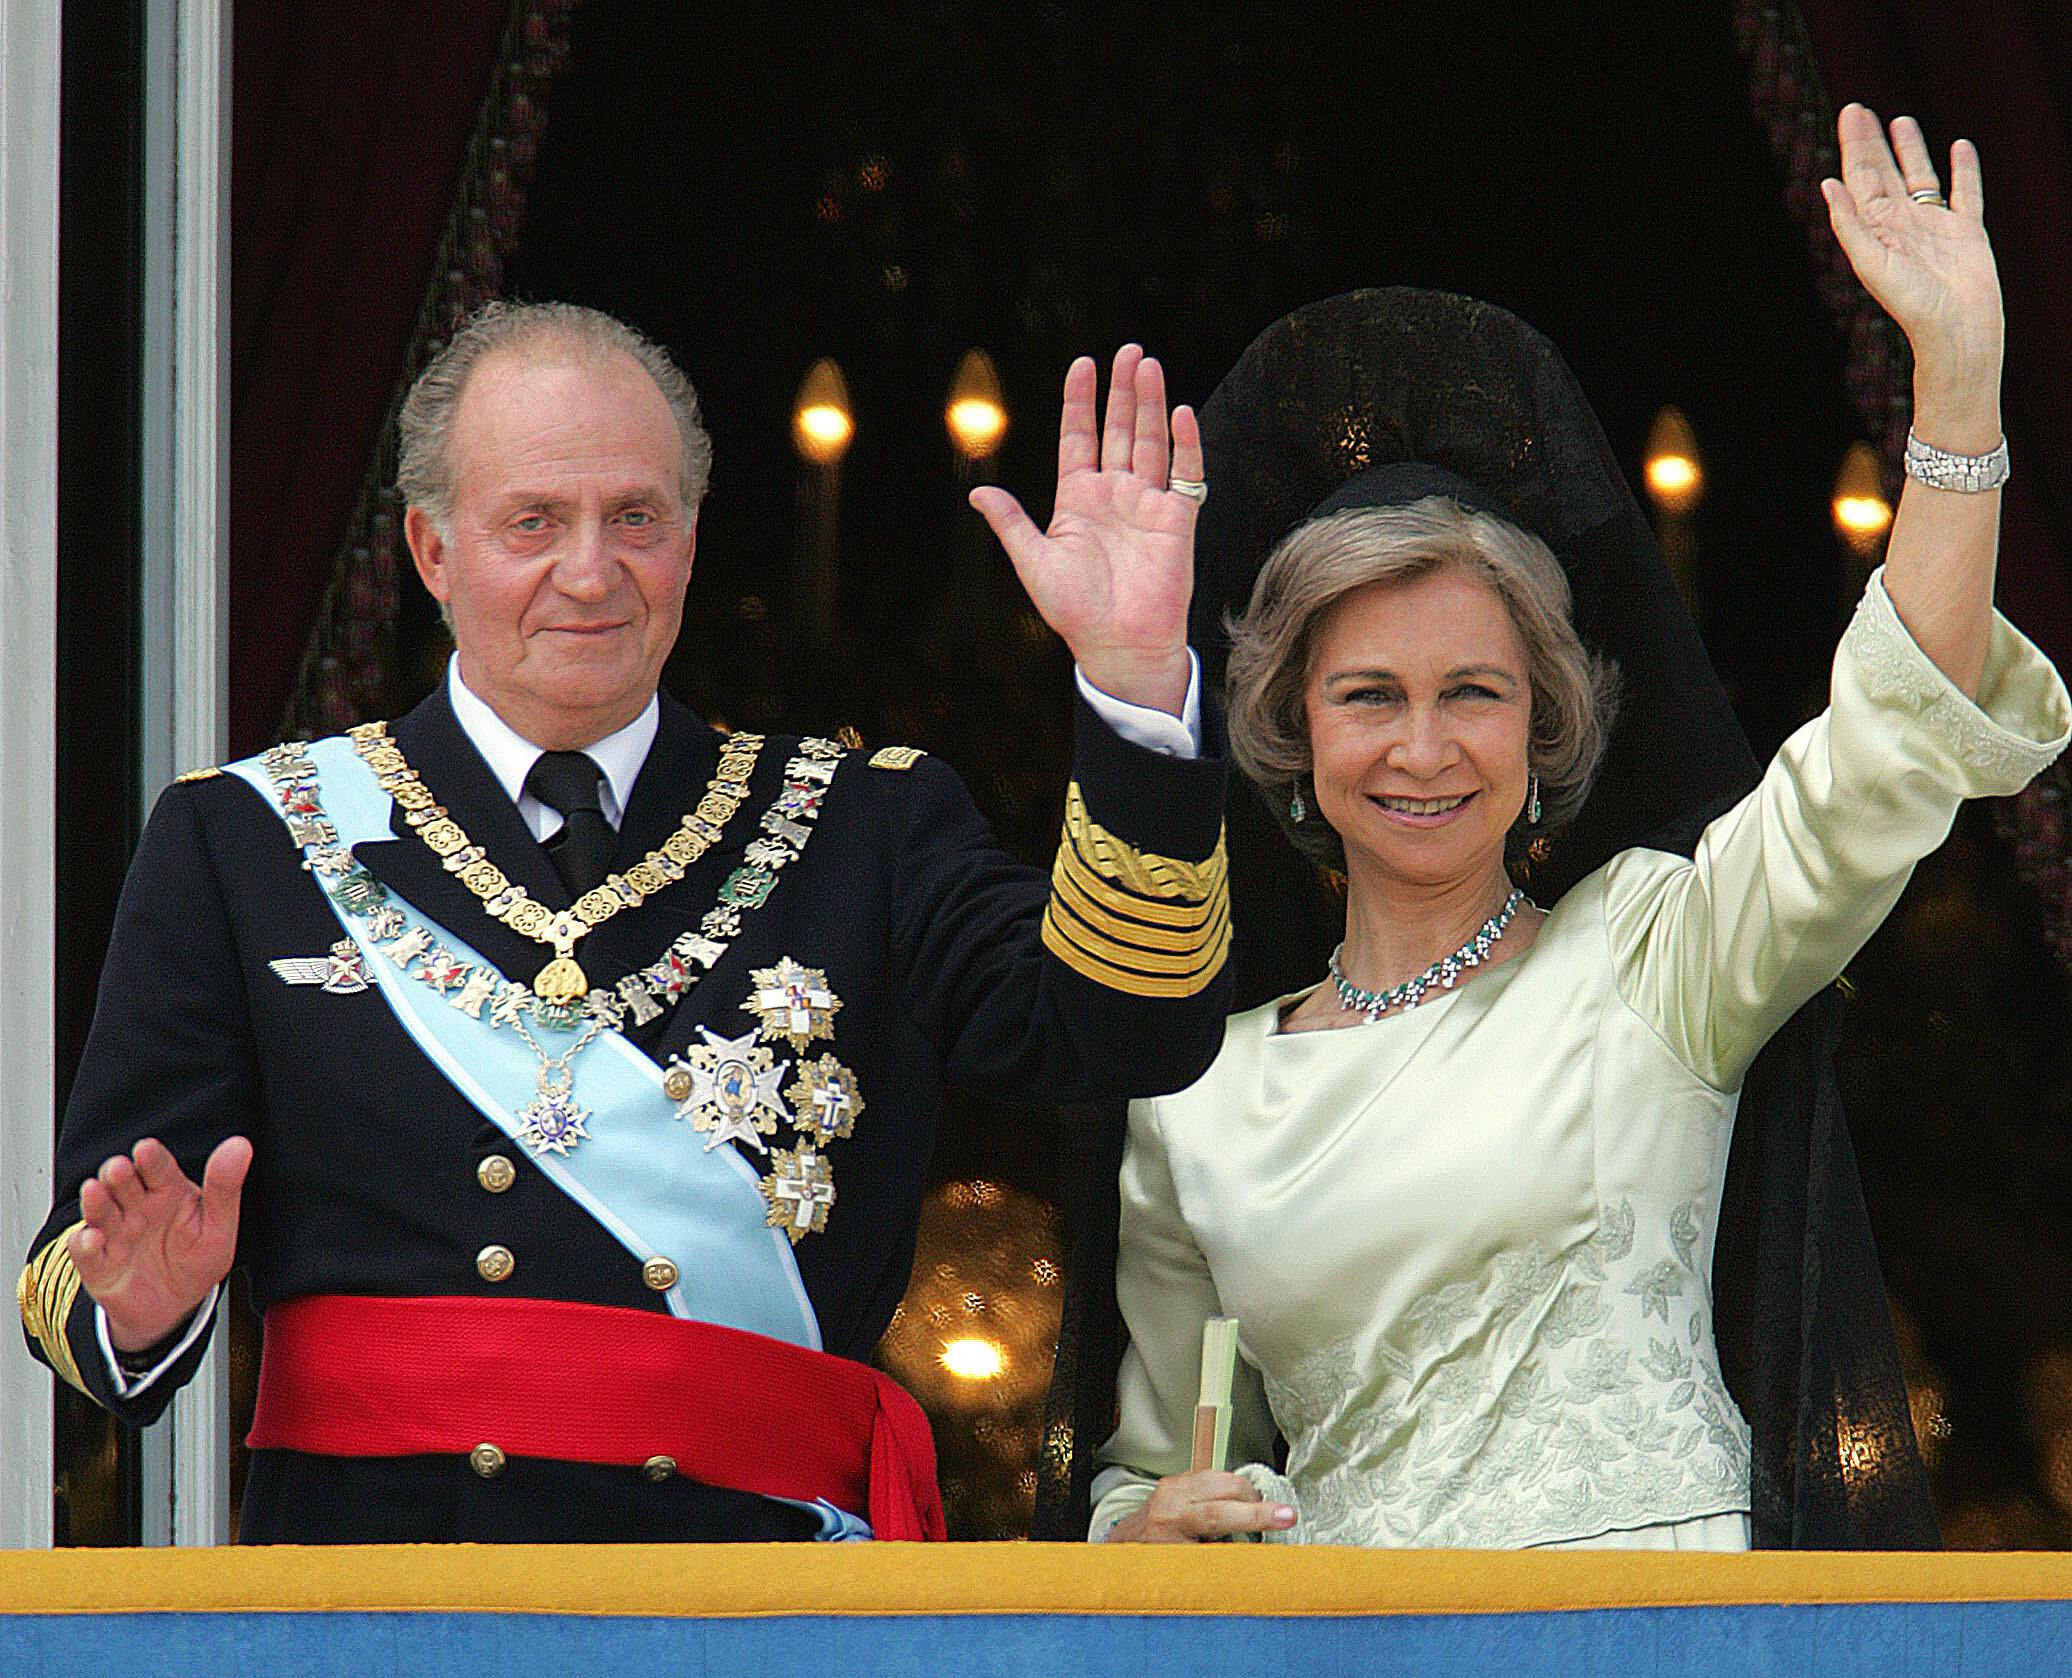 (ARKIV) (FILES) In this file photo taken on May 22, 2004 Juan Carlos of Spain and his wife Queen Sofia of Spain salute the crowd from the balcony of the Oriental Palace in Madrid 22 May 2004, after the wedding of Prince Felipe of Spain and Letizia Ortiz. Tidligere kong Juan Carlos har forladt Spanien for at forsøge at beskytte landets monarki. Mens modstanden vokser, står forfatningen som kongehusets beskytter. Det skriver Ritzau, søndag den 9. august 2020.. (Foto: CHRISTOPHE SIMON/Ritzau Scanpix)